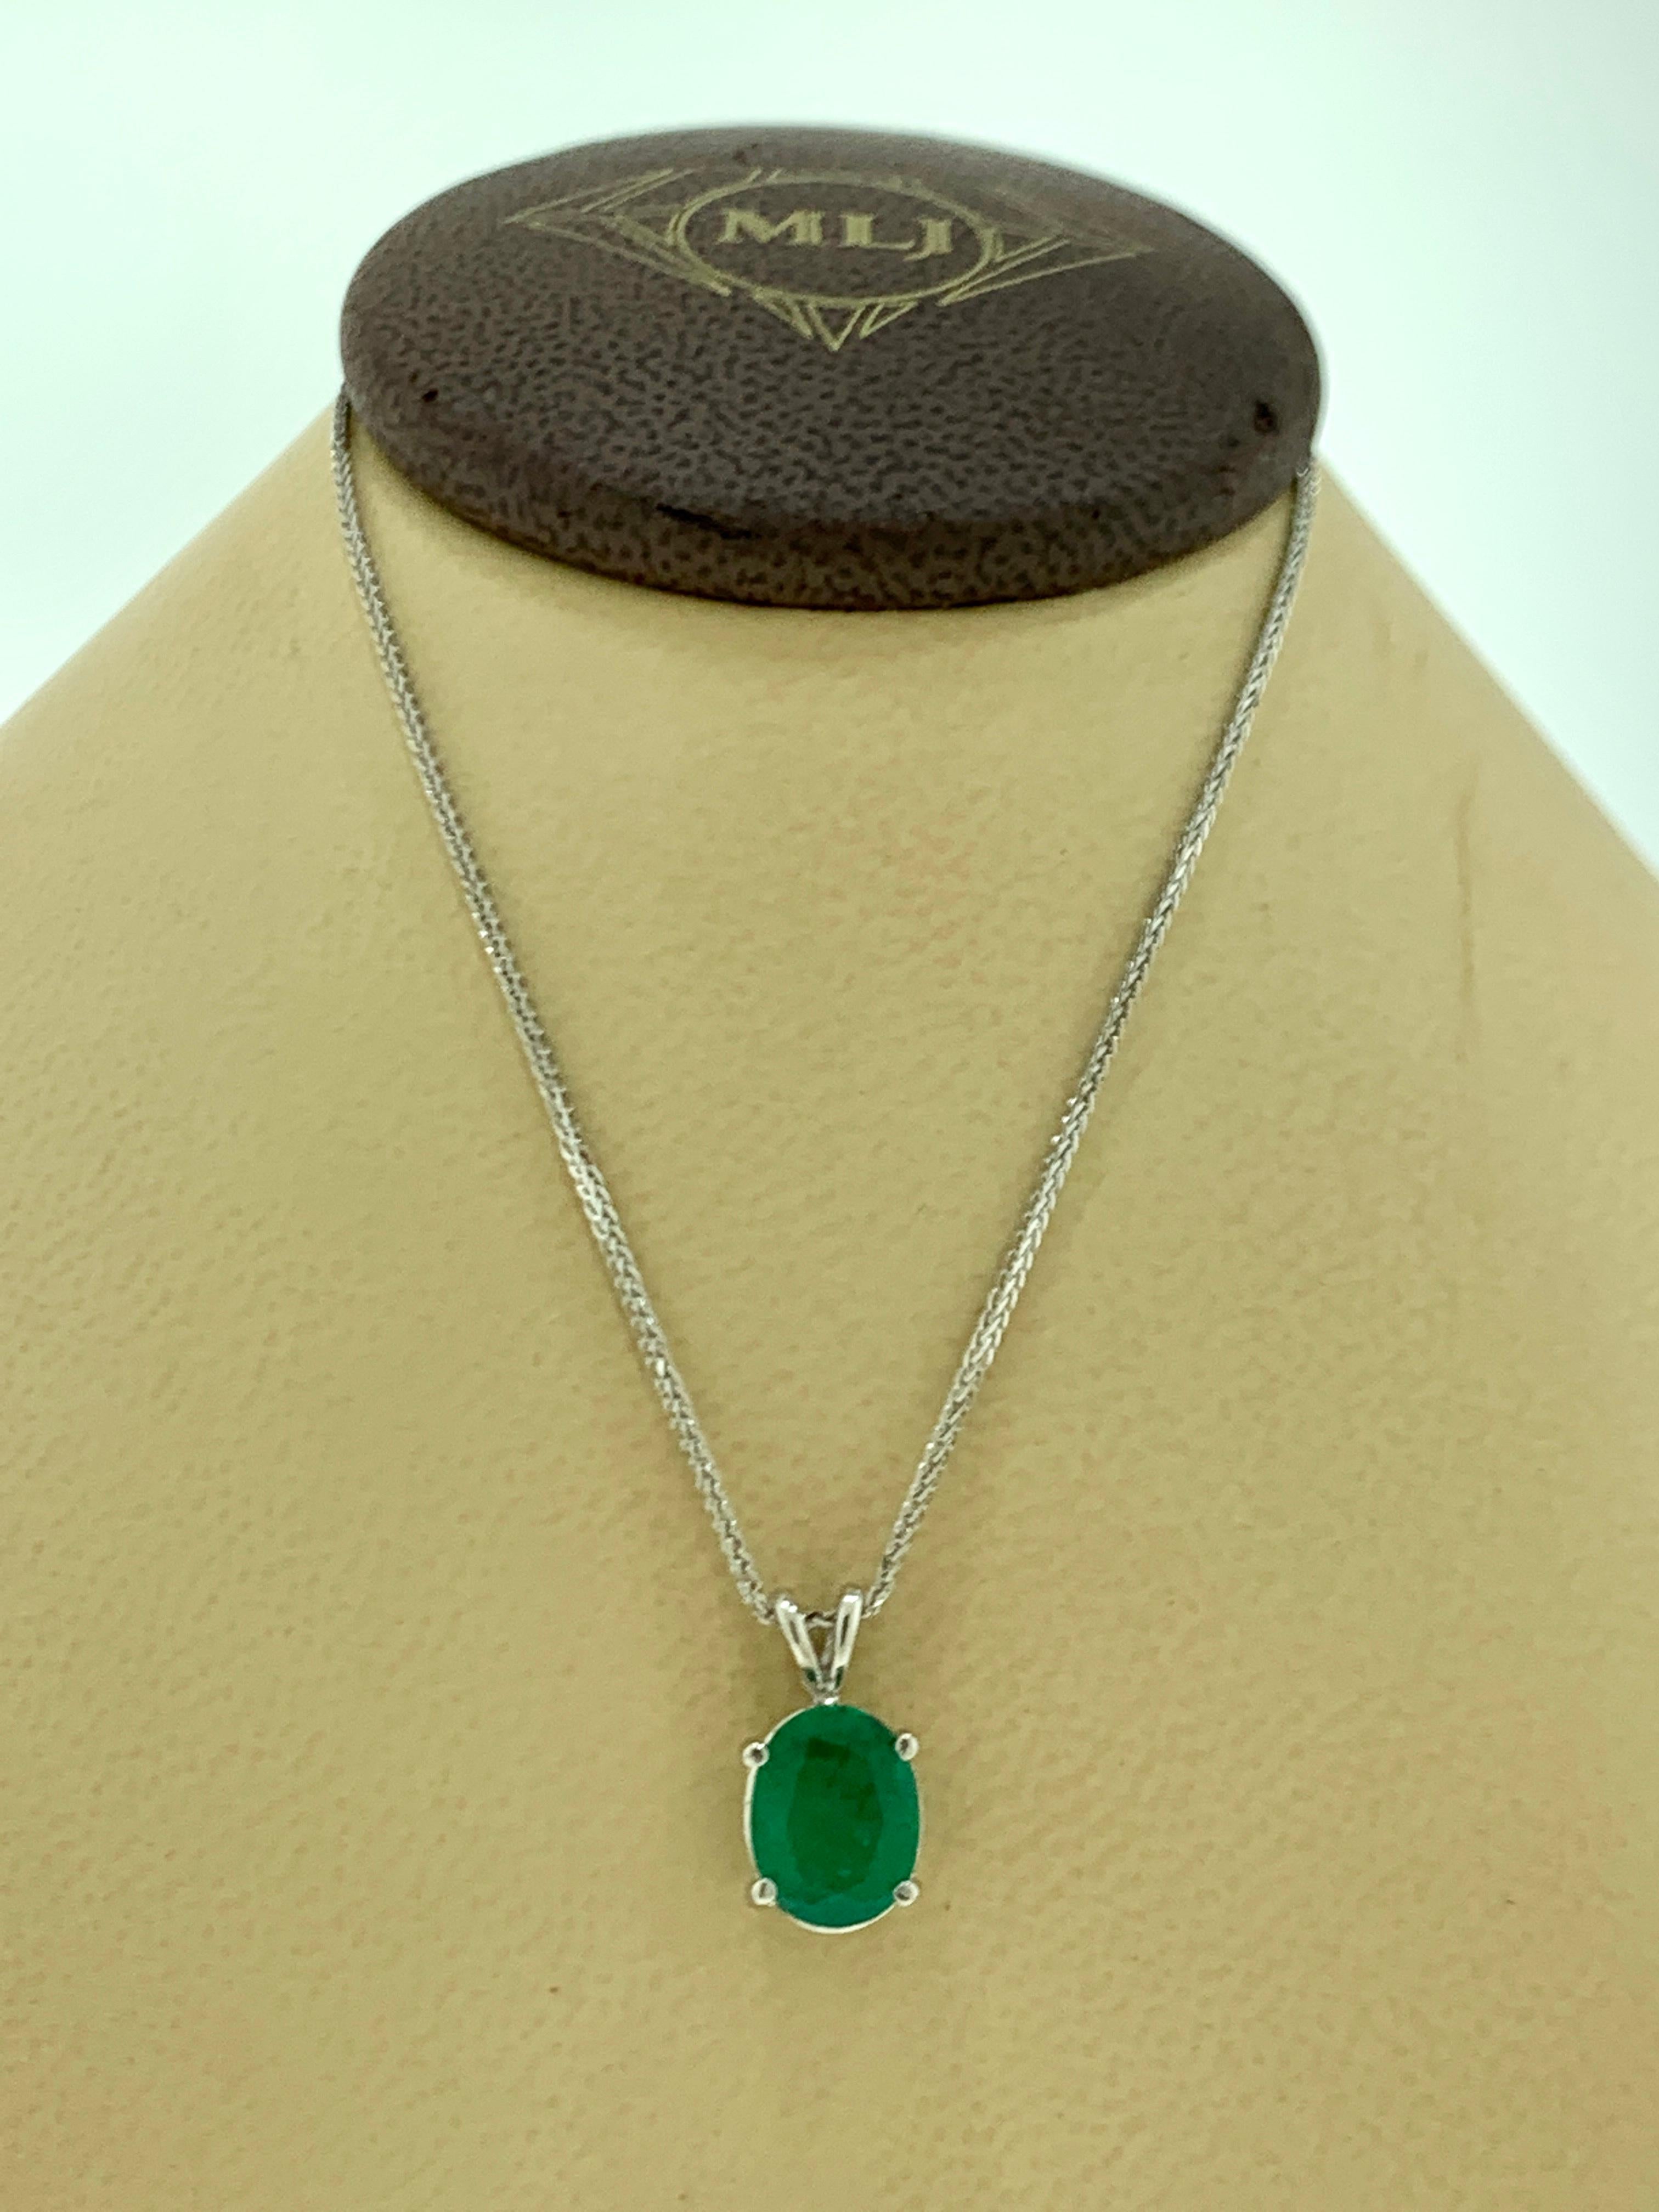 2.5 Carat Oval Shape Emerald Pendant or Necklace 14 Karat White Gold with Chain 1